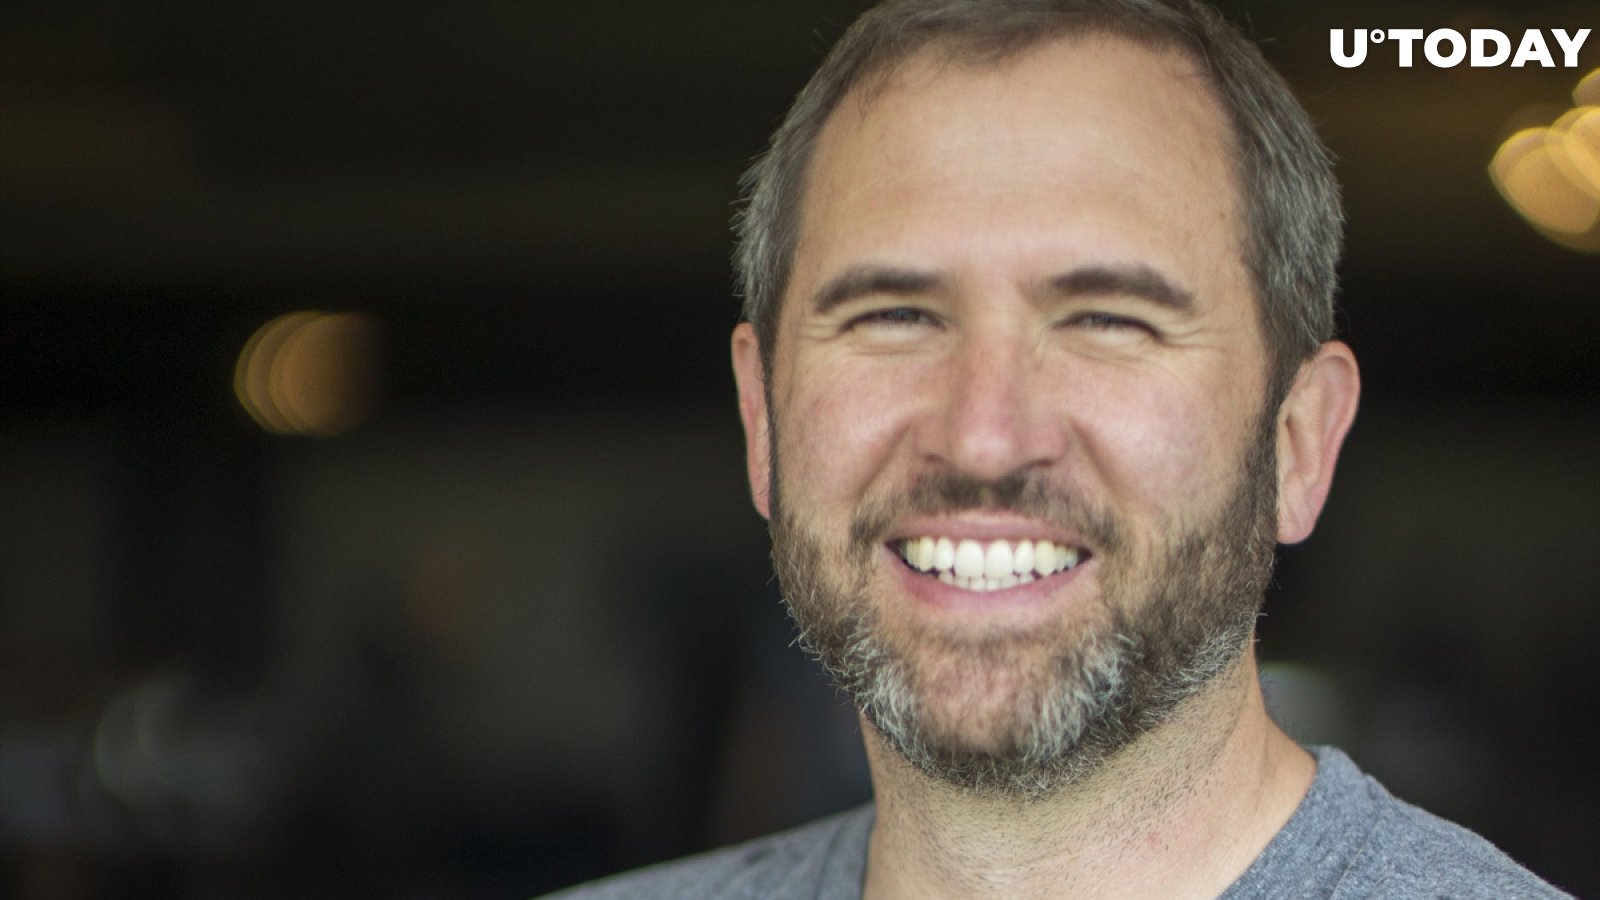 Ripple CEO Brad Garlinghouse Breaks His Silence on Company's Plan to Move Abroad